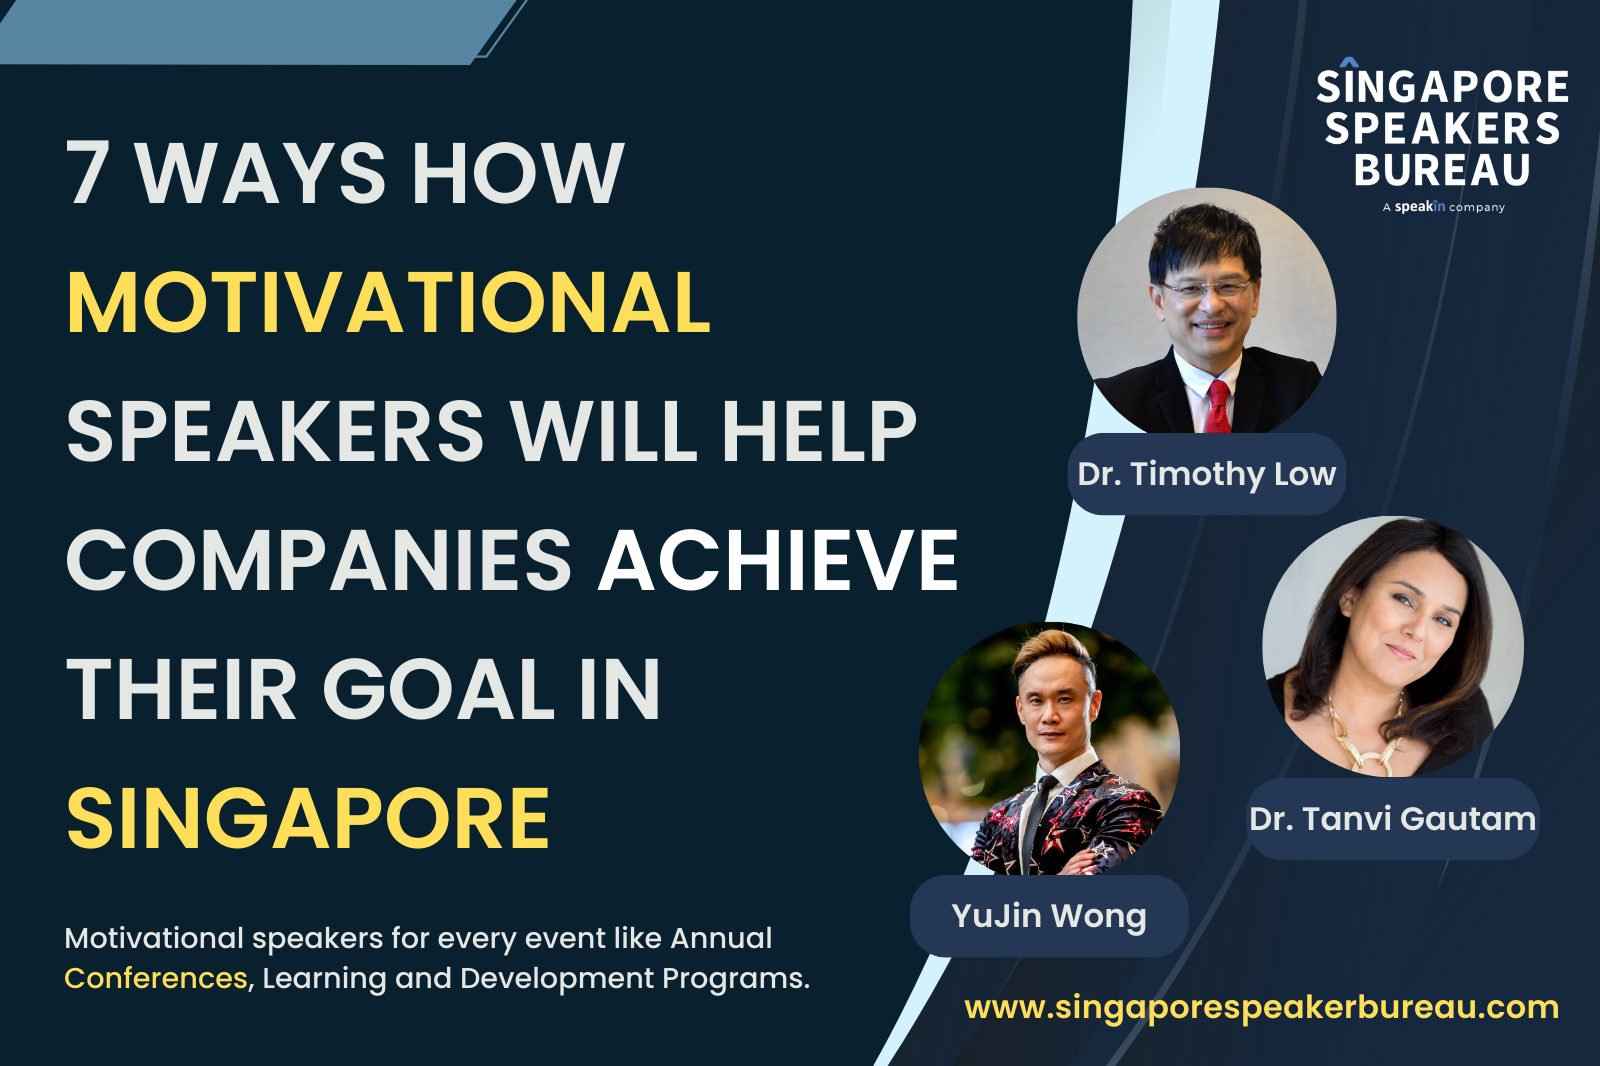 7 Ways how motivational speakers will help companies achieve their goal in Singapore